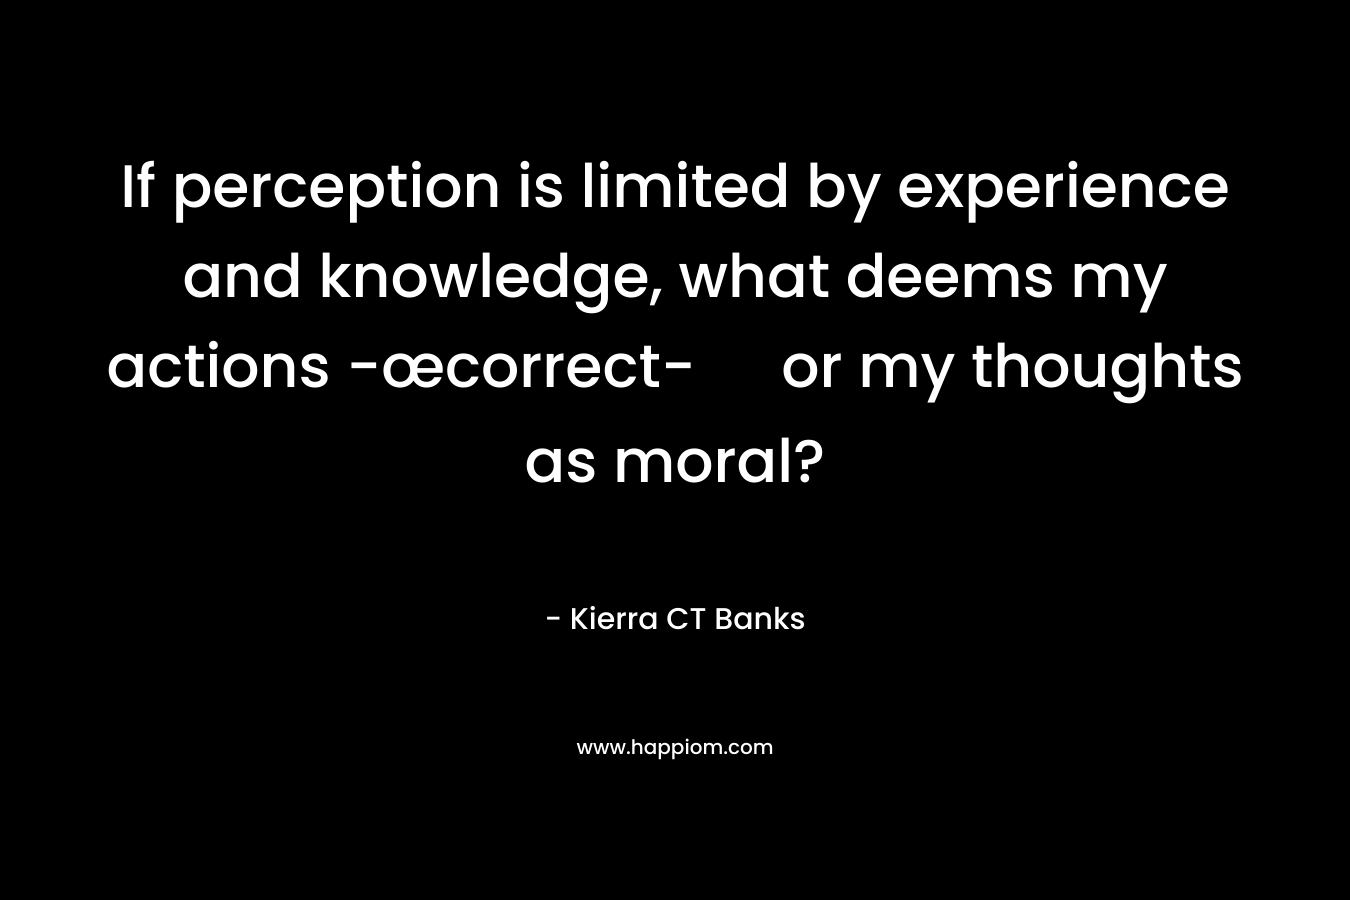 If perception is limited by experience and knowledge, what deems my actions -œcorrect- or my thoughts as moral?